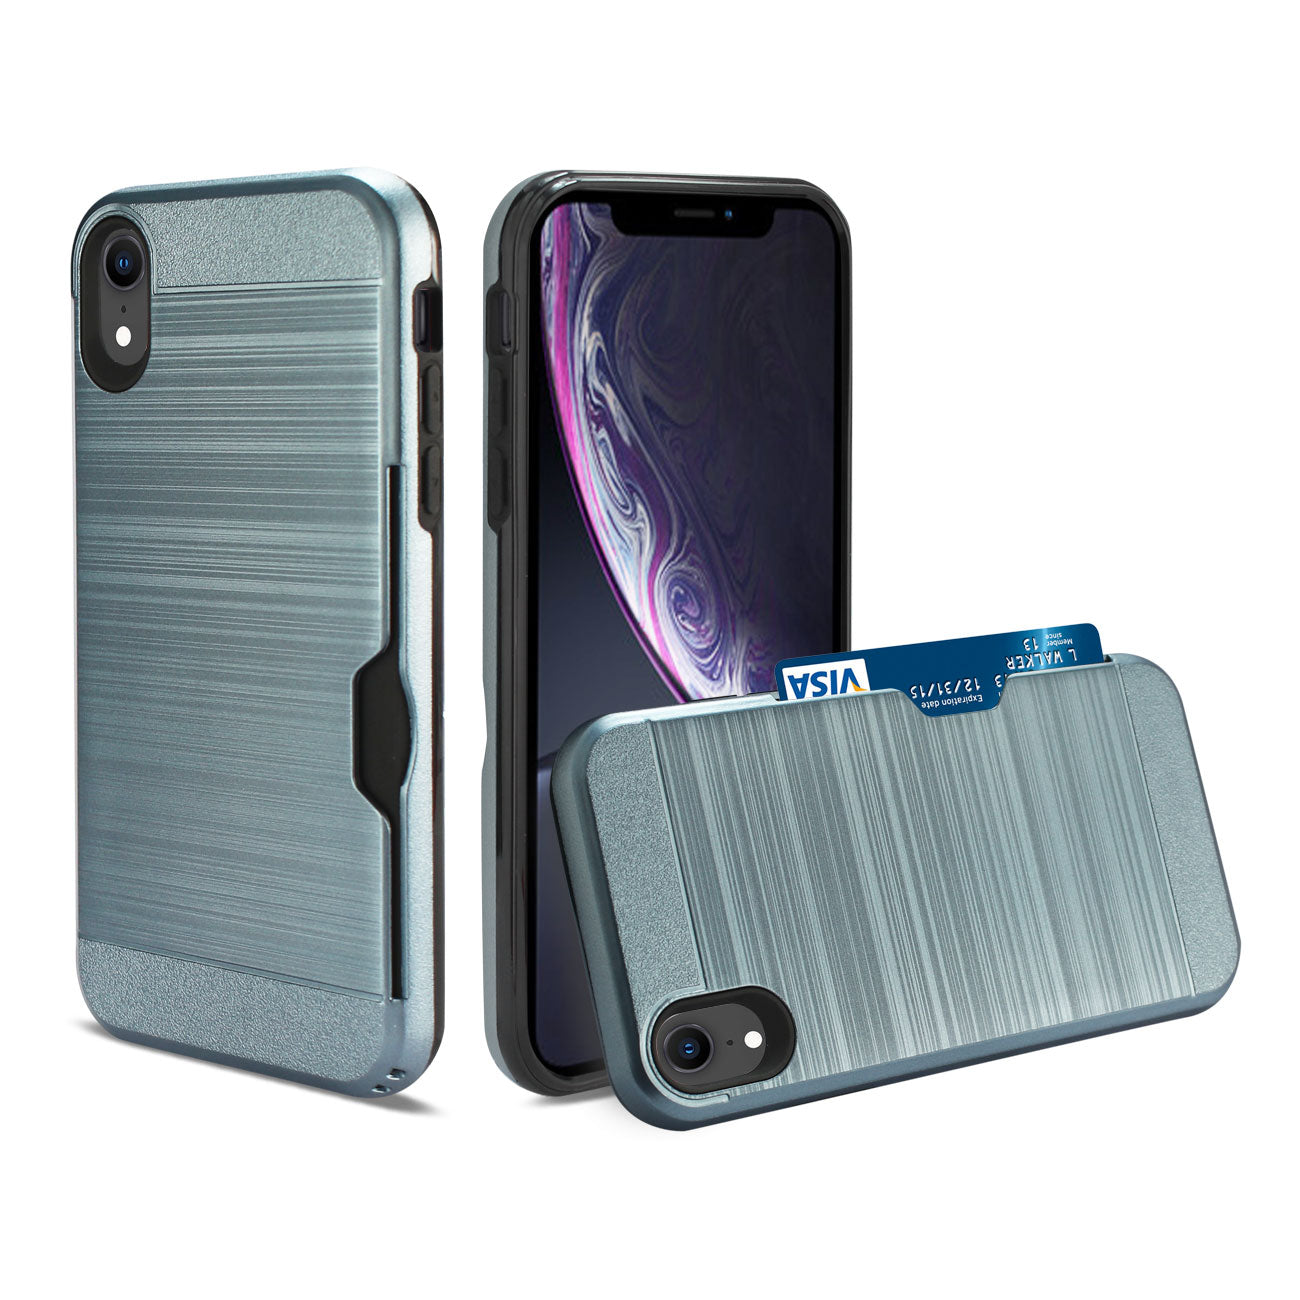 Reiko iPhone XS Max Slim Armor Hybrid Case With Card Holder In Navy